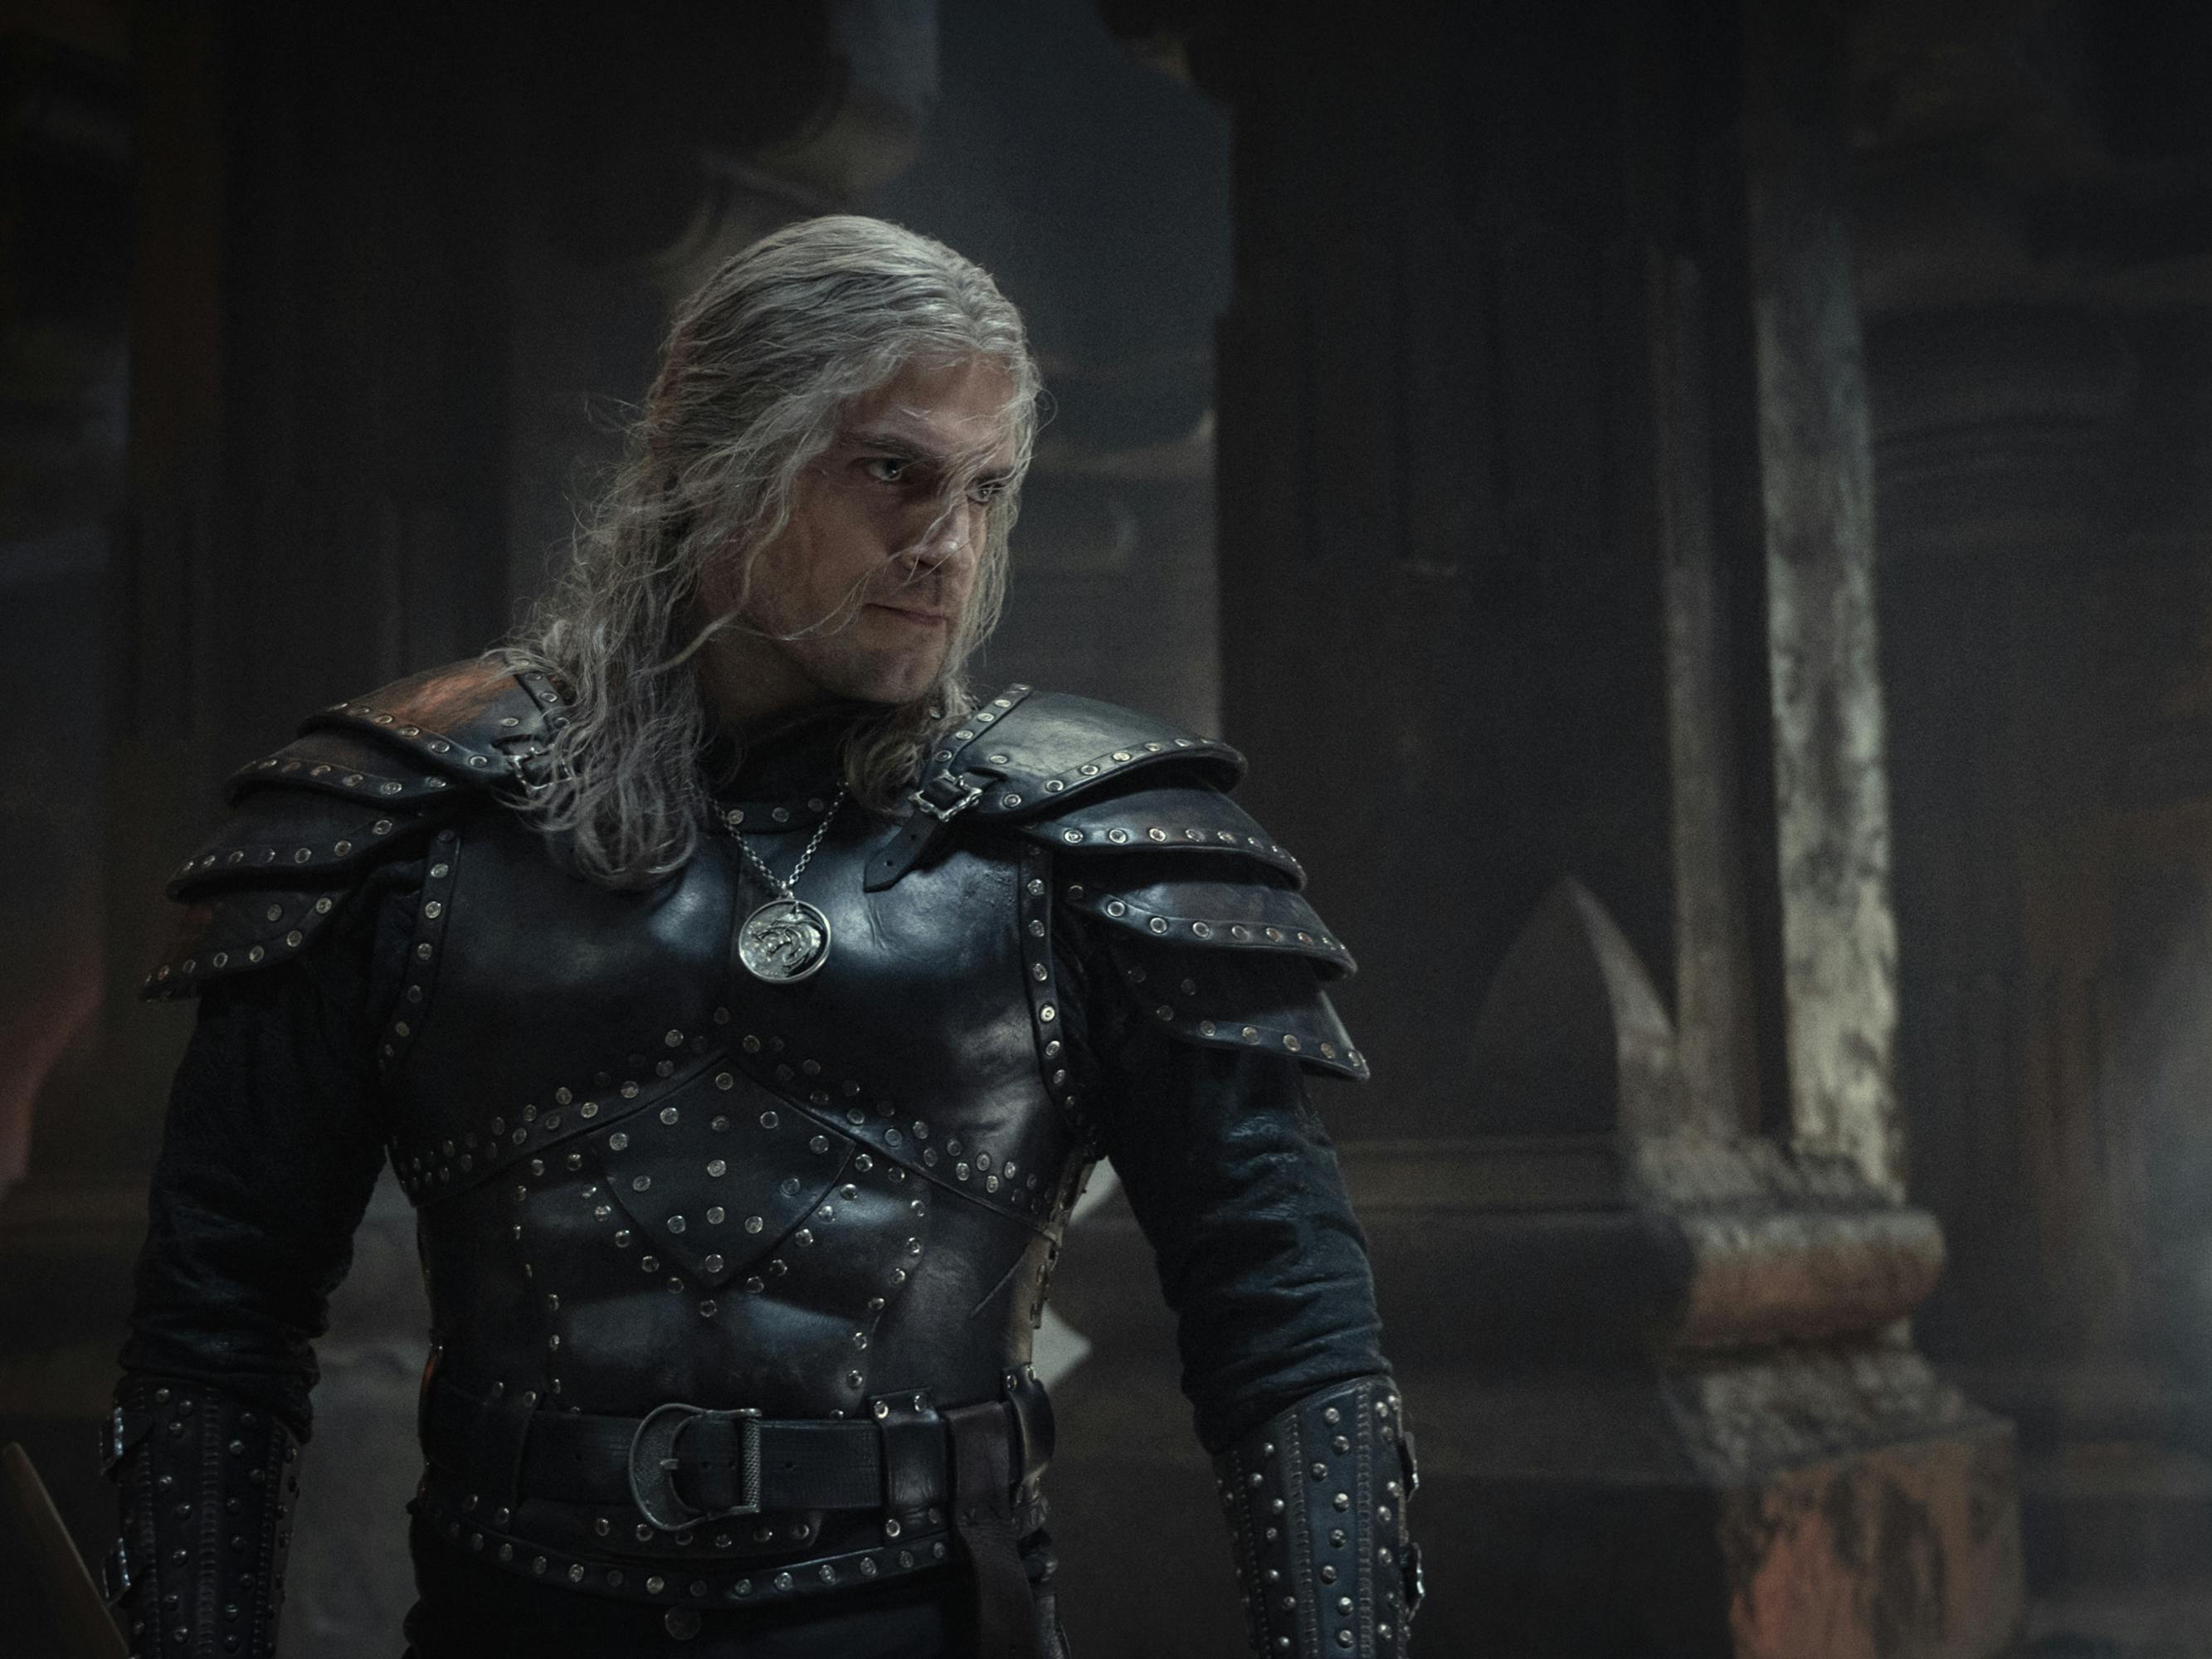 Geralt of Rivia wears black armour and has long grey hair.